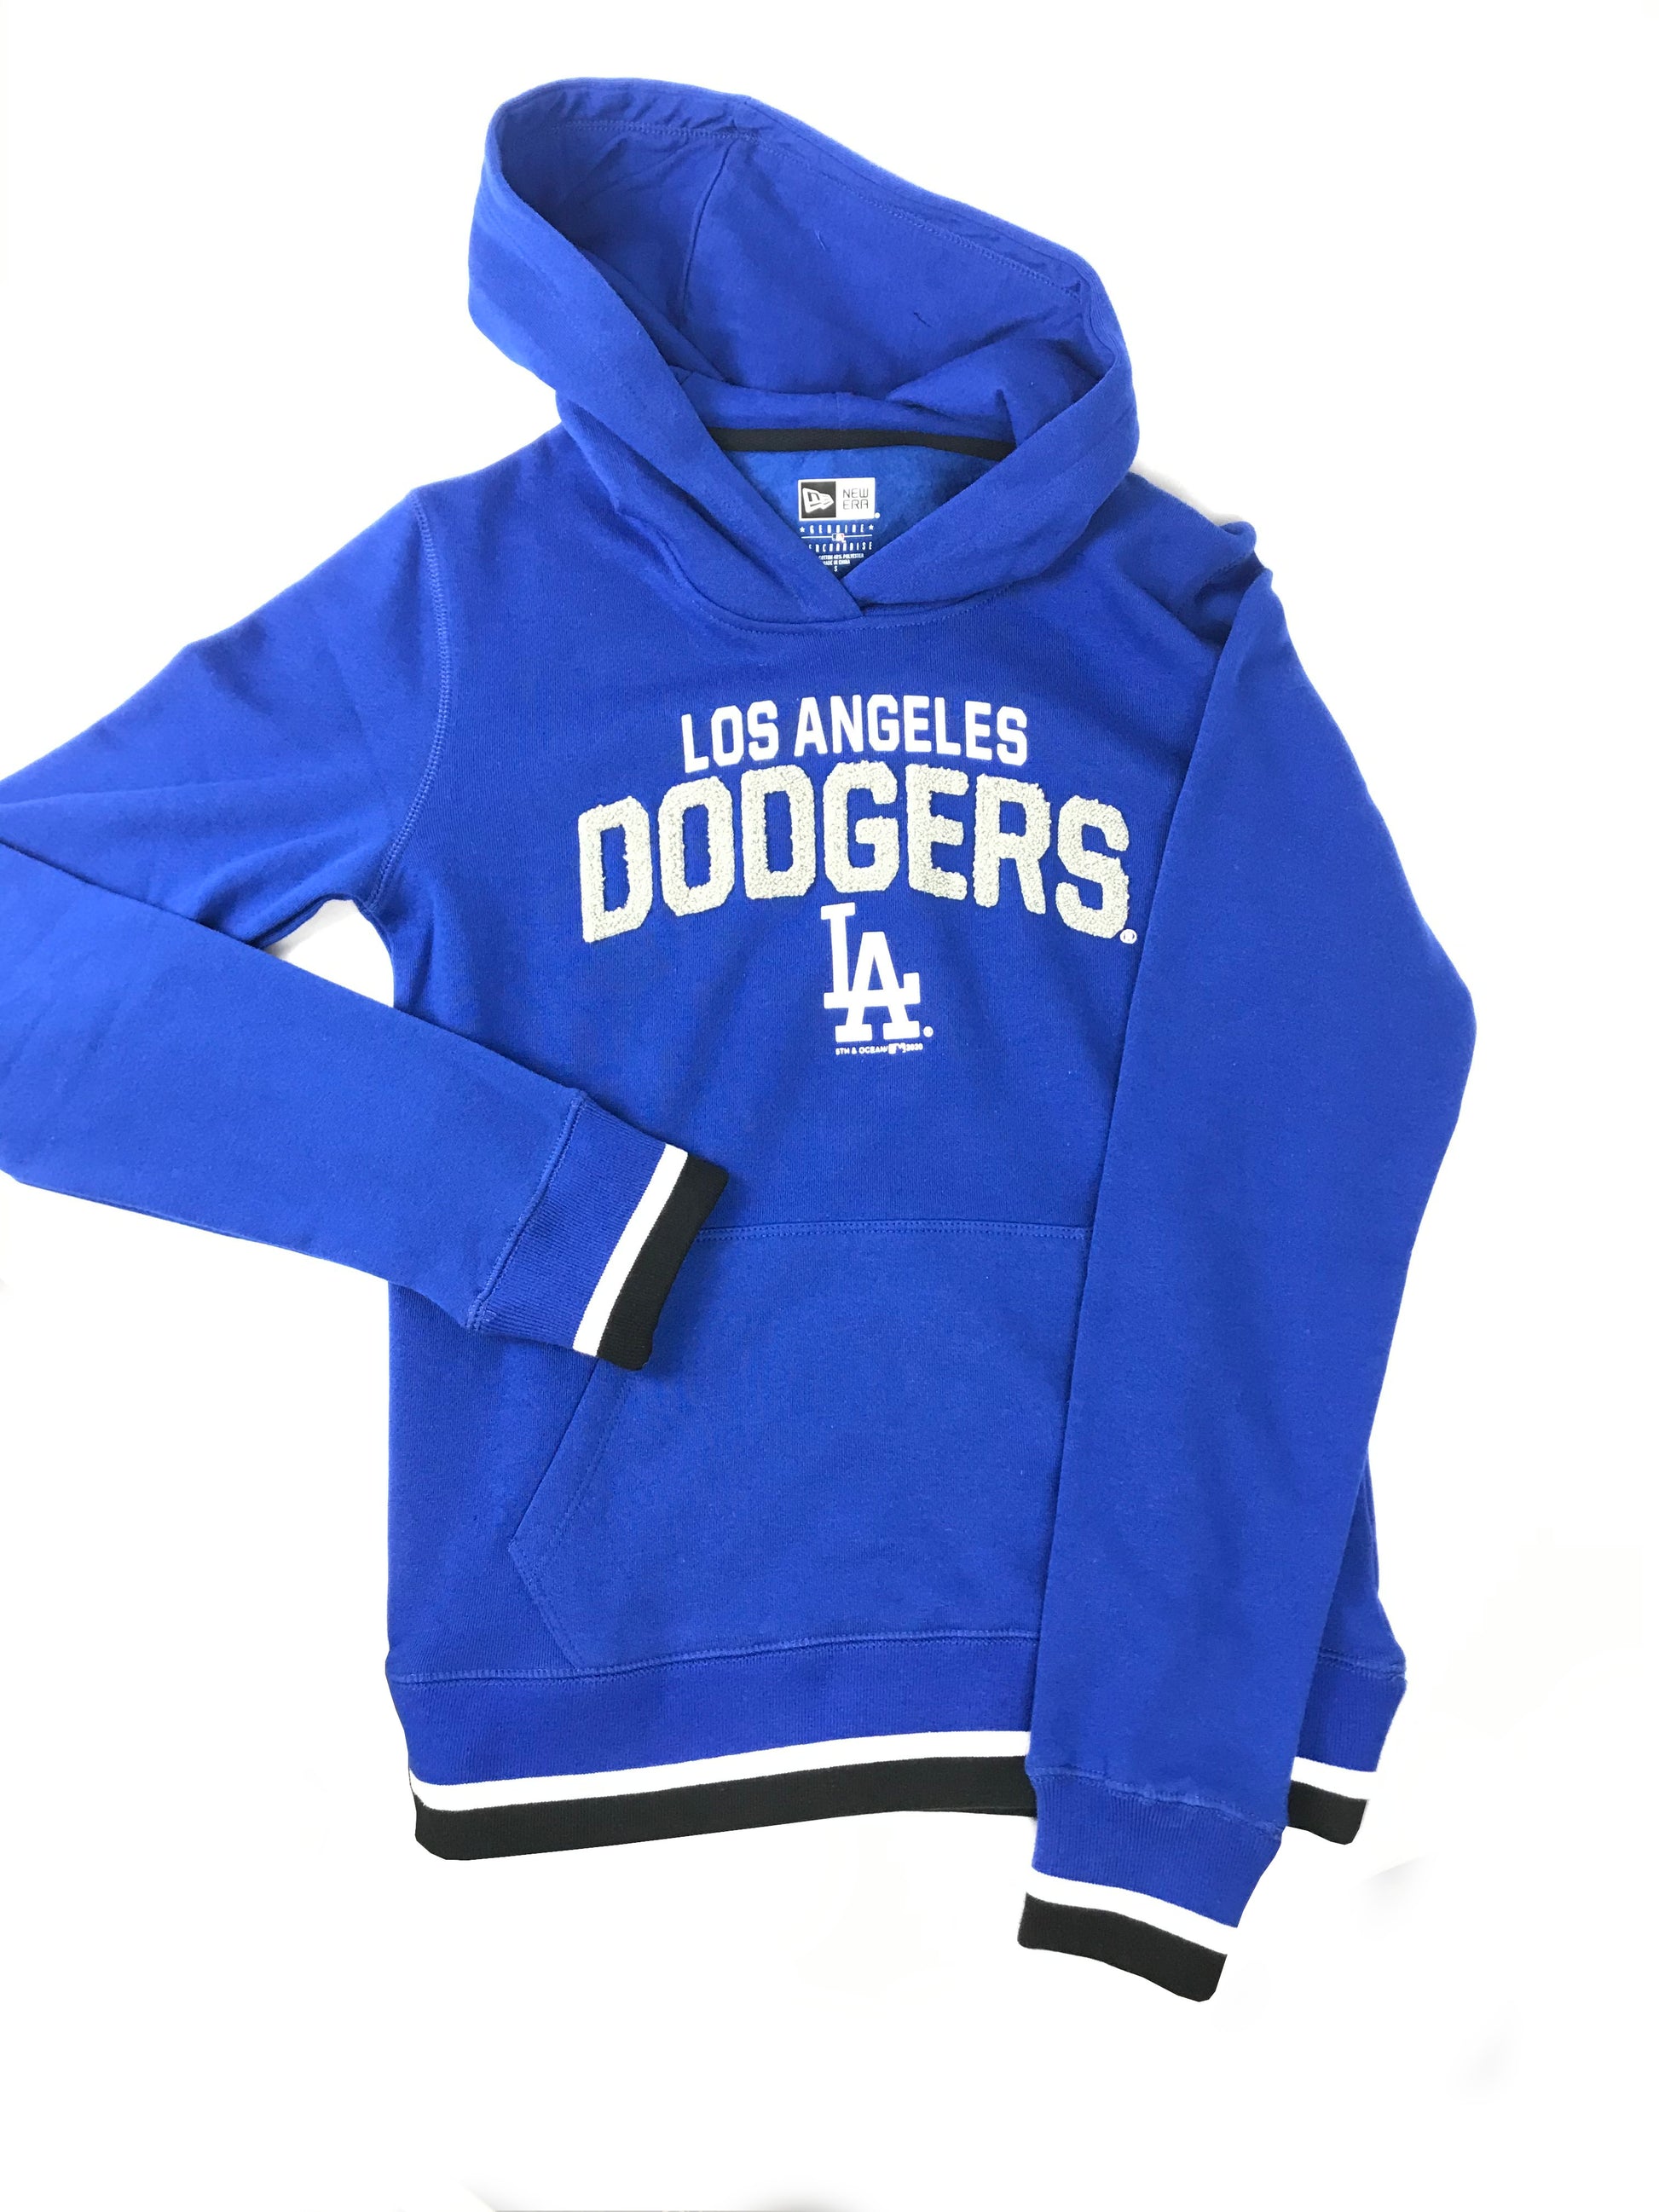 Los Angeles Dodgers Women's Knit Name Hoodie Sweater 20 Blue / XL